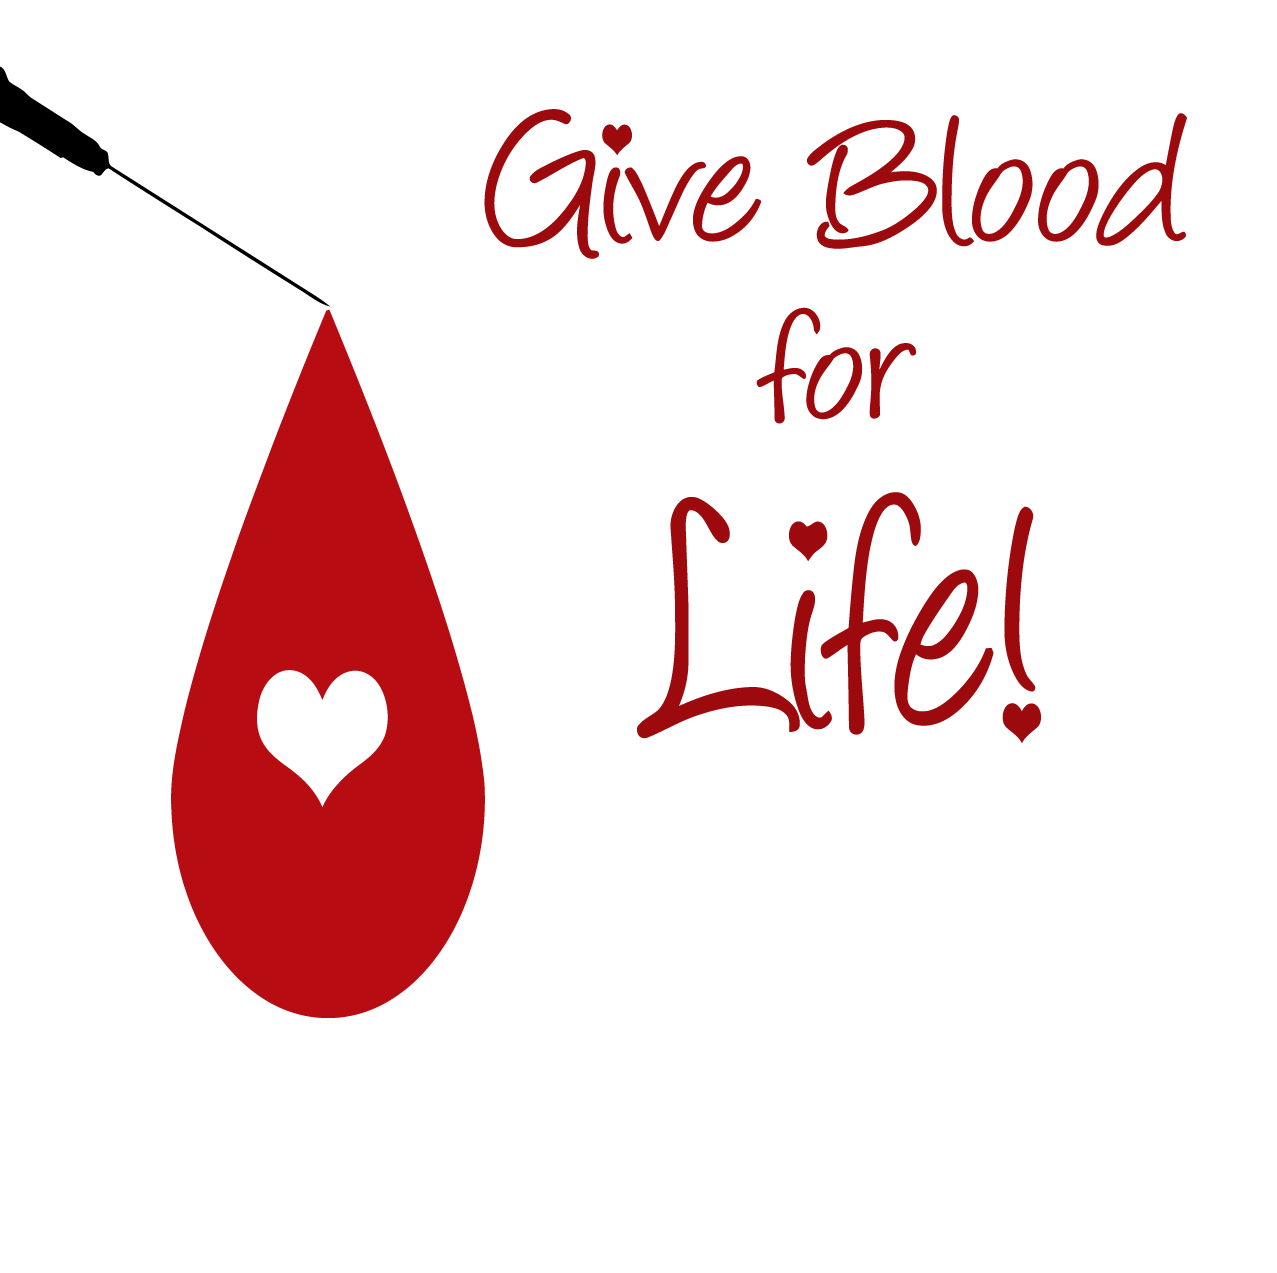 Red Cross Blood Drive Images | Free Download Clip Art | Free Clip ...